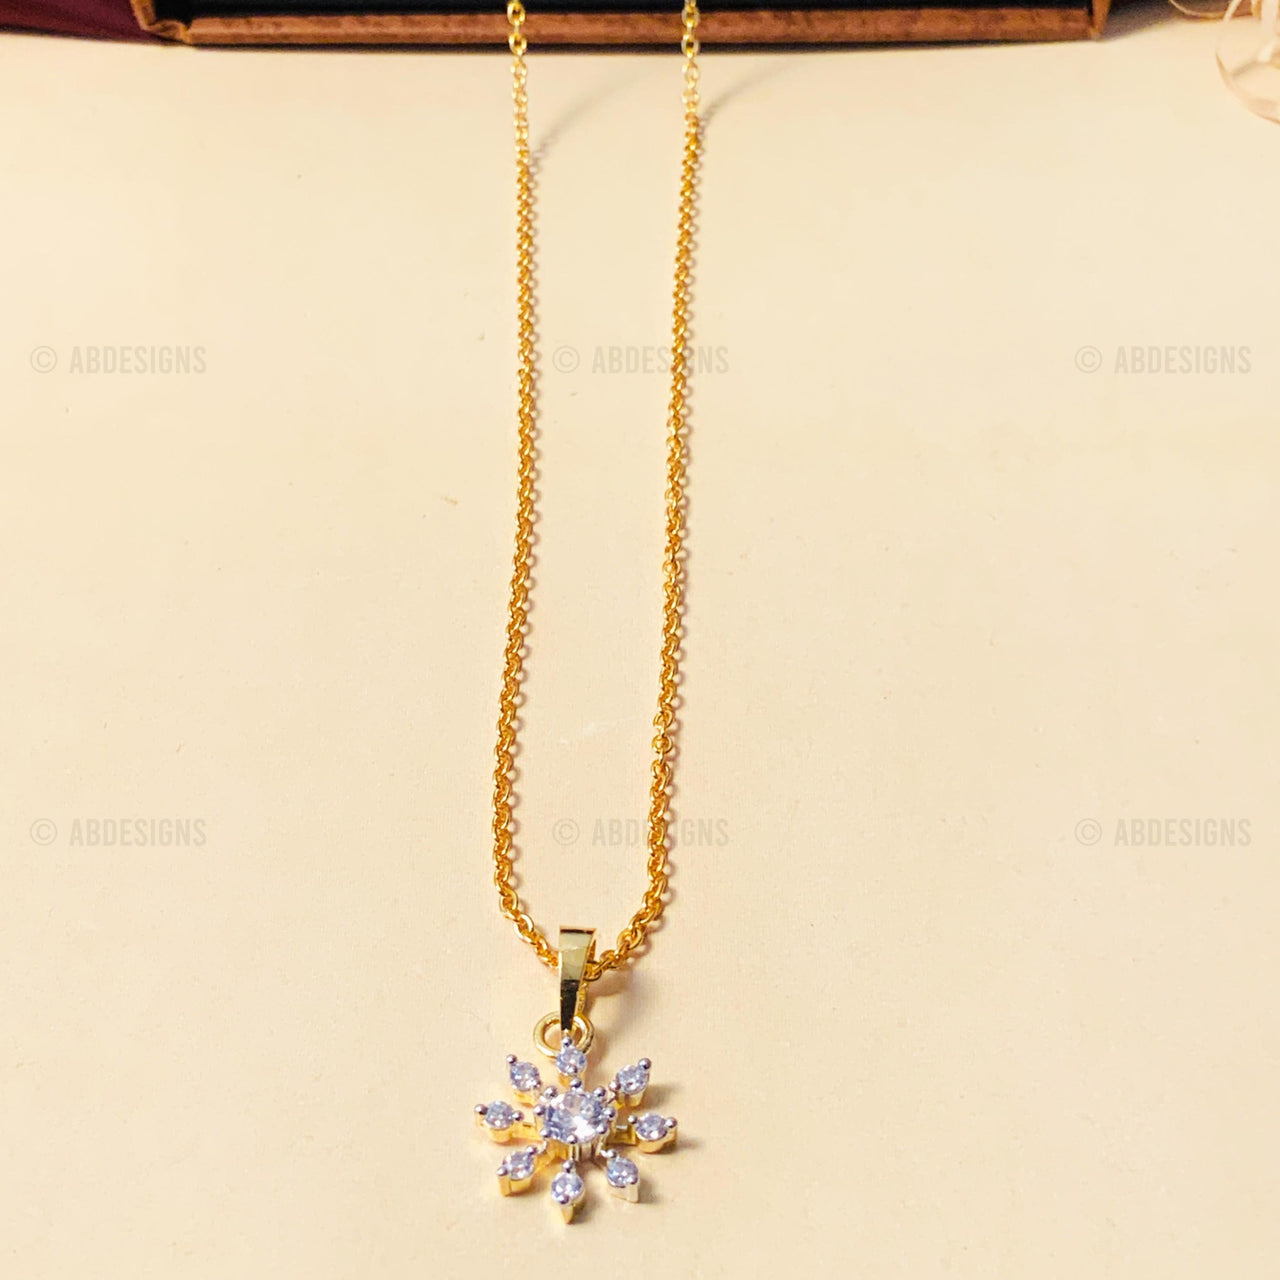 Luxurious High-Quality Gold Plated Pendant Chain